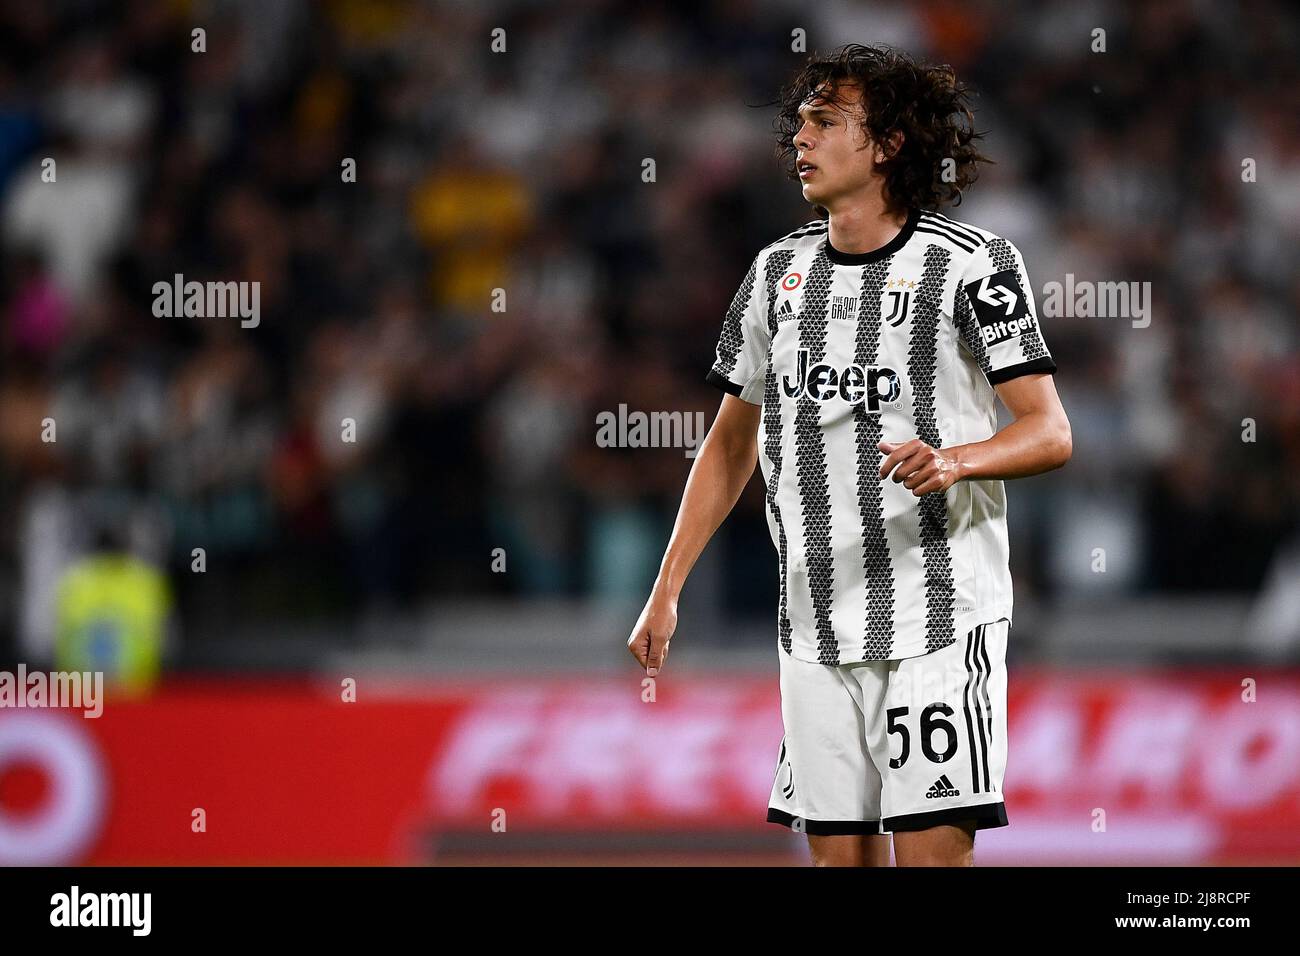 Turin, Italy. 16 May 2022. Martin Palumbo of Juventus FC looks on during the Serie A football match between Juventus FC and SS Lazio. Credit: Nicolò Campo/Alamy Live News Stock Photo